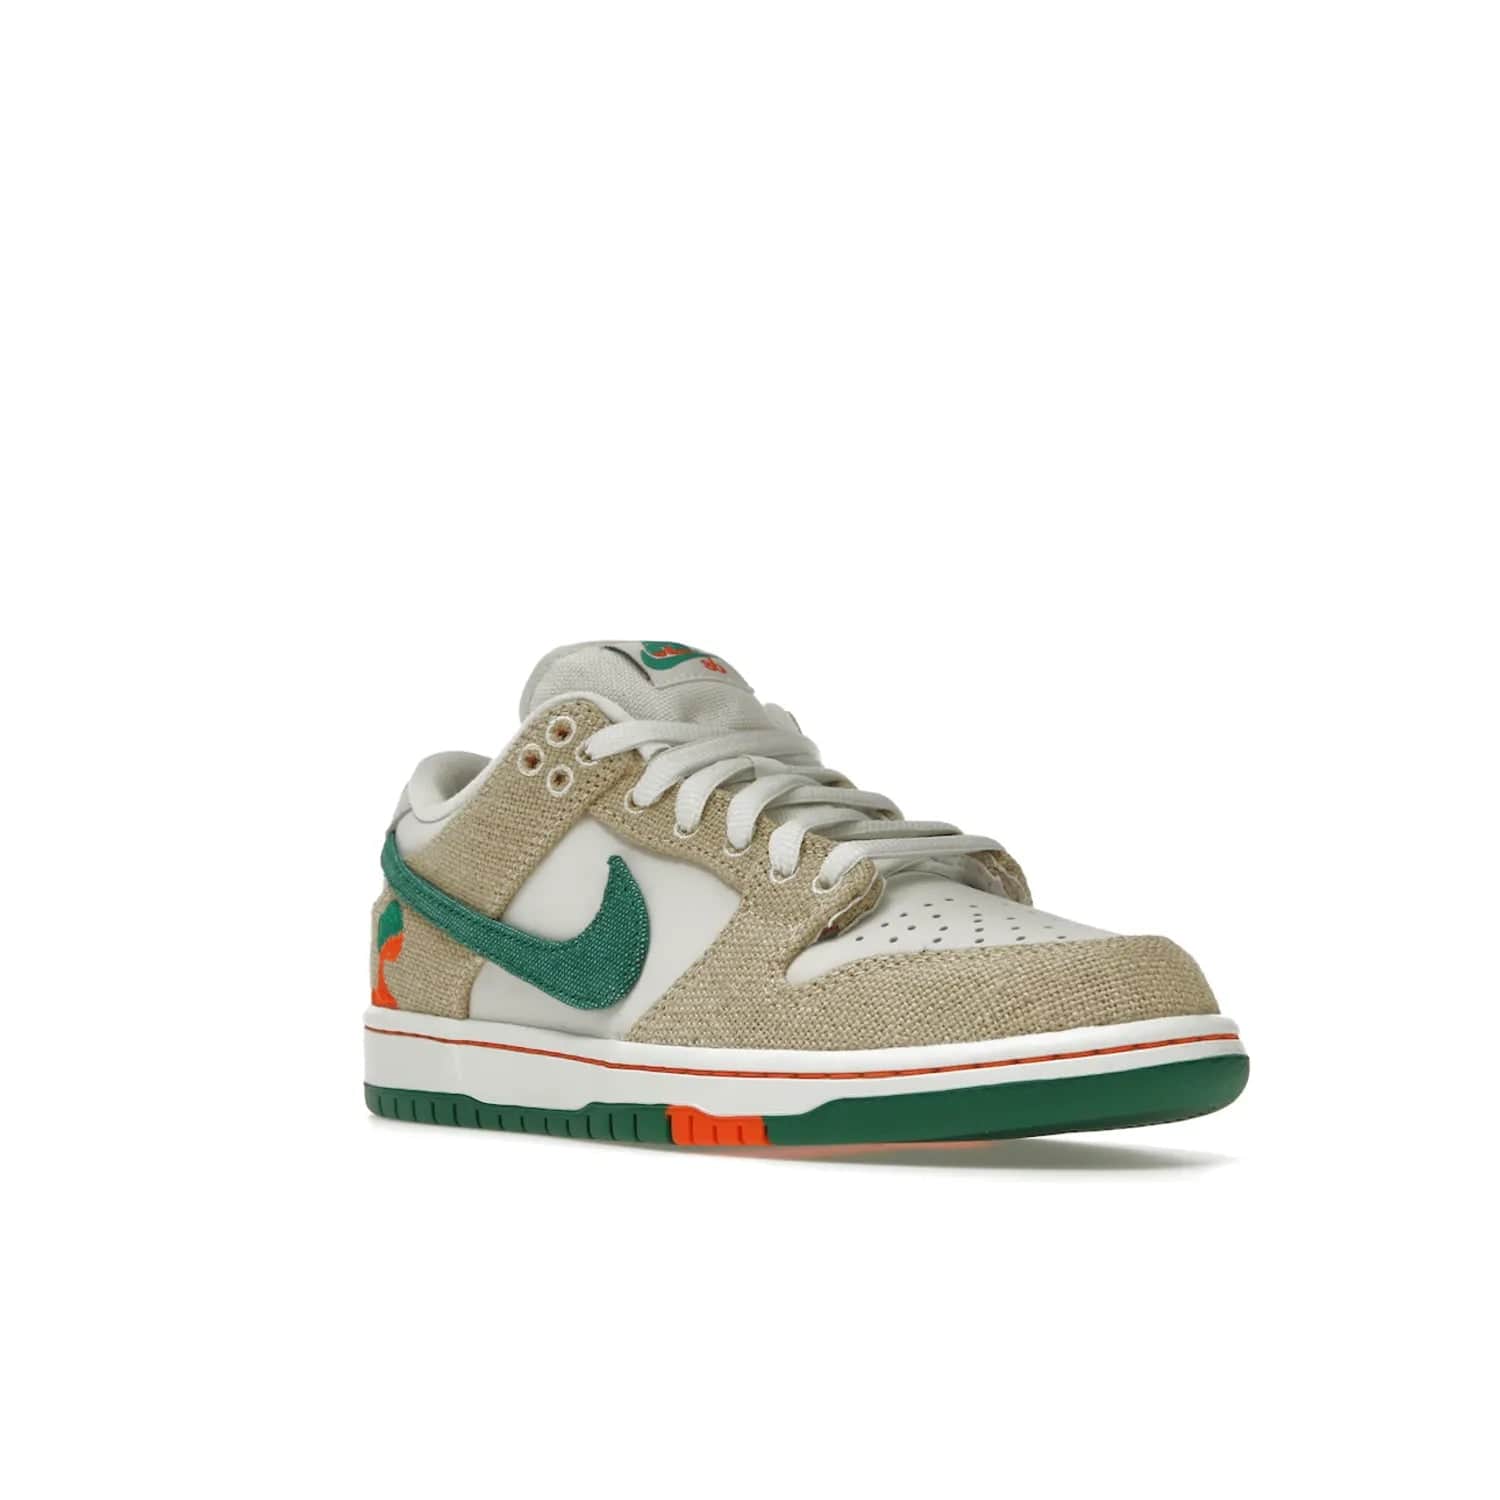 Nike SB Dunk Low Jarritos - Image 6 - Only at www.BallersClubKickz.com - Shop limited edition Nike SB Dunk Low Jarritos! Crafted with white leather and tear-away canvas materials with green accents. Includes orange, green, and white laces to customize your look. Available now.